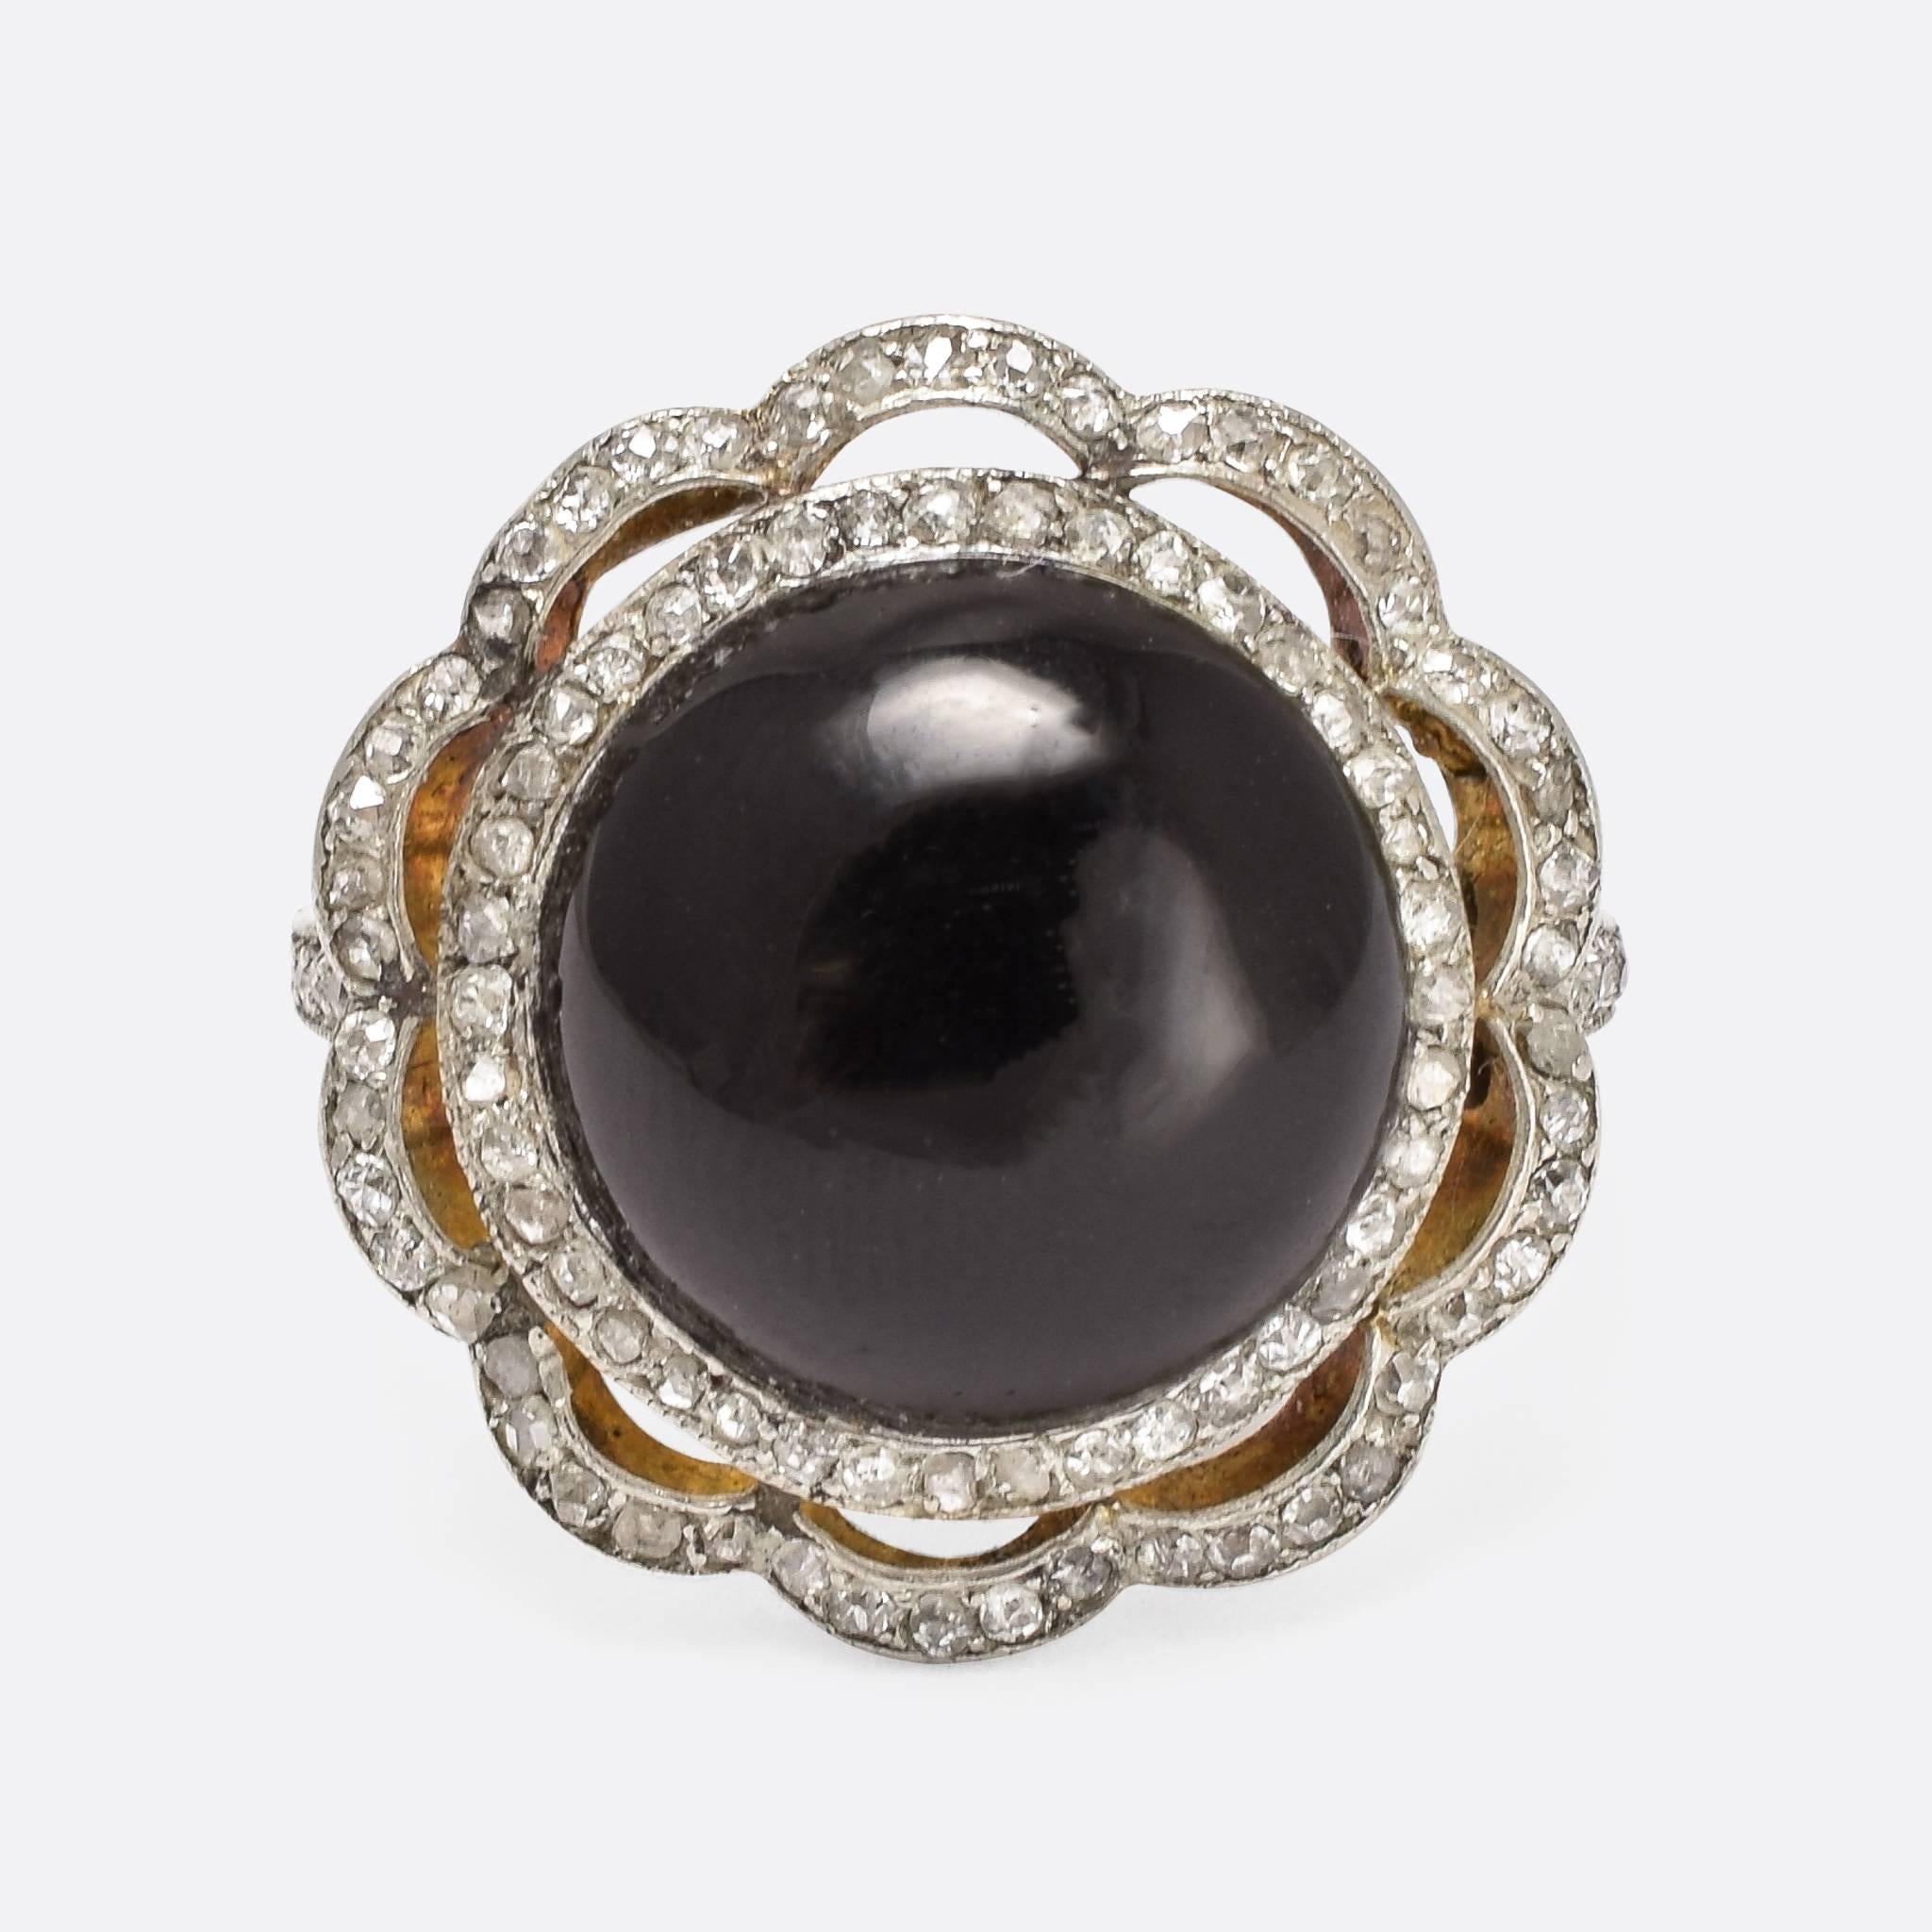 This fabulous antique cocktail ring was made in France in the early 20th Century. It is set with a large onyx cabochon in the centre, surrounded by two rows of rose cut diamonds in millegrain platinum settings. The bezel displays wonderful leaf and